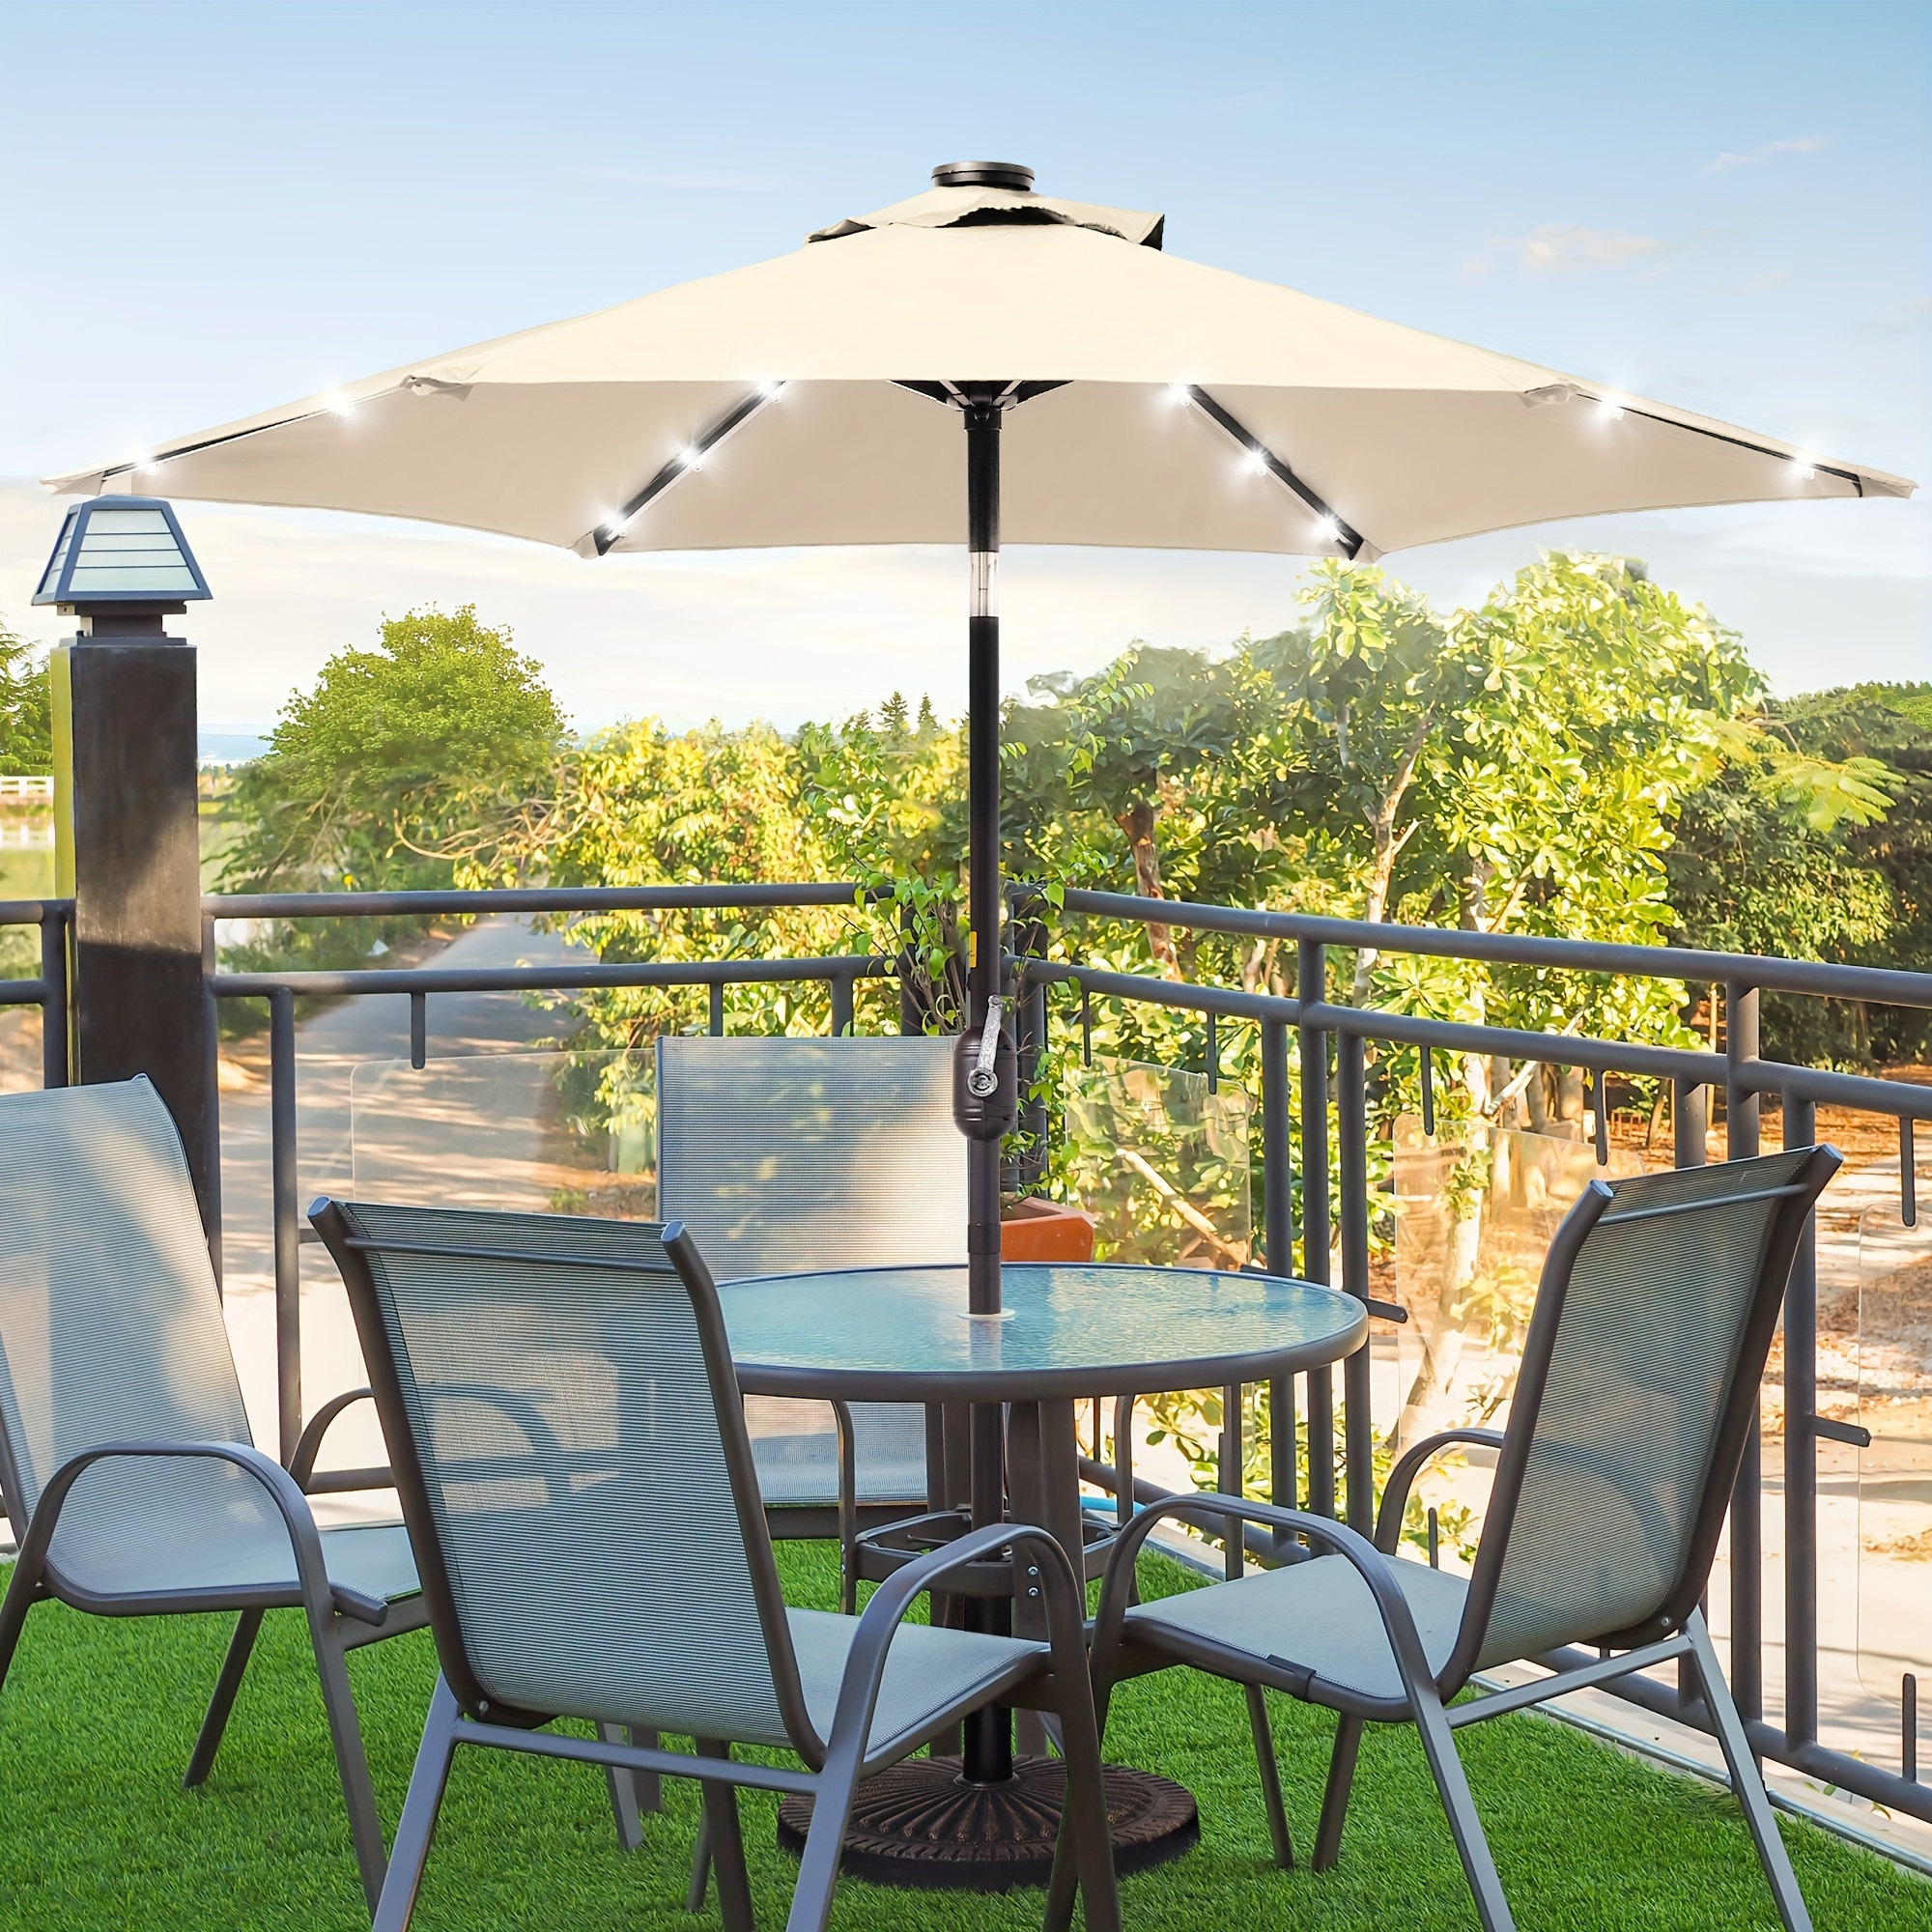 

7.5ft Led Pato Market Umbrellas And Shade, Table Umbrella With Tilt Button For Deck, Garden And Pool